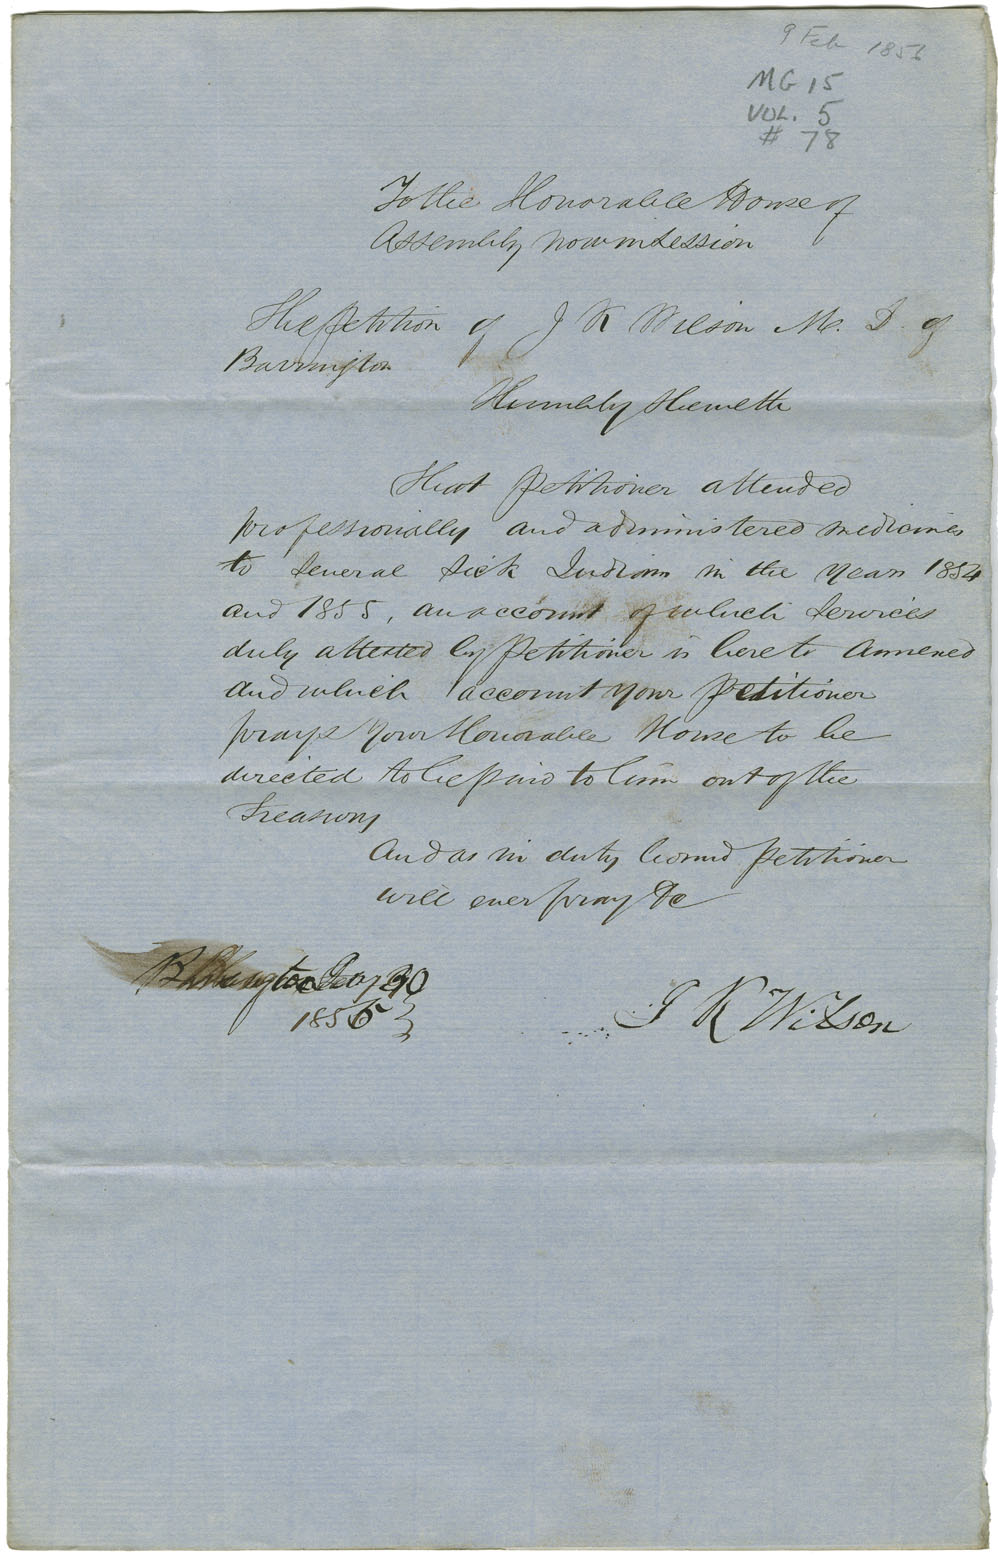 Petition of J.K. Wilson of Barrington, requesting payment for services to Mi'kmaq.